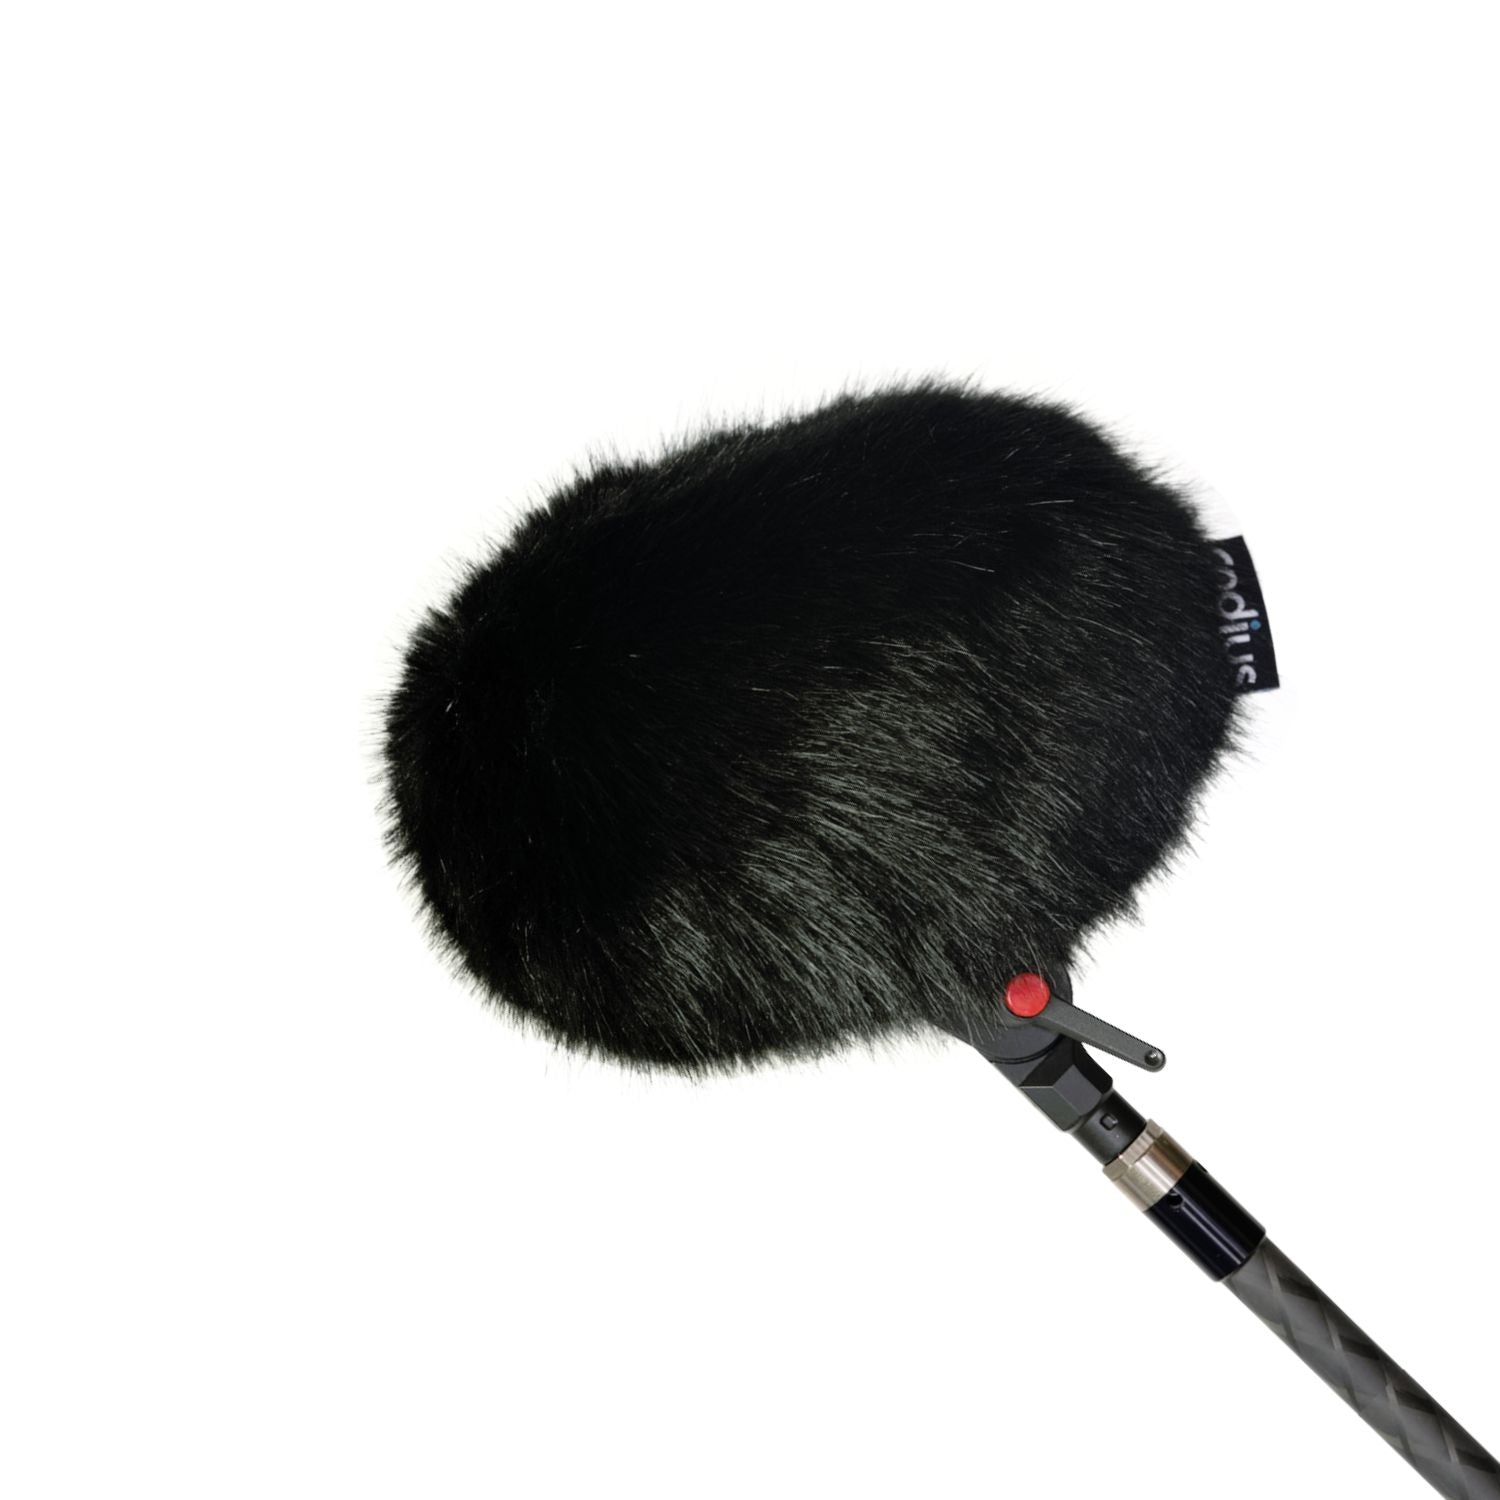 Replacement Windcover for Rycote WS9 Windshield, Black Fur